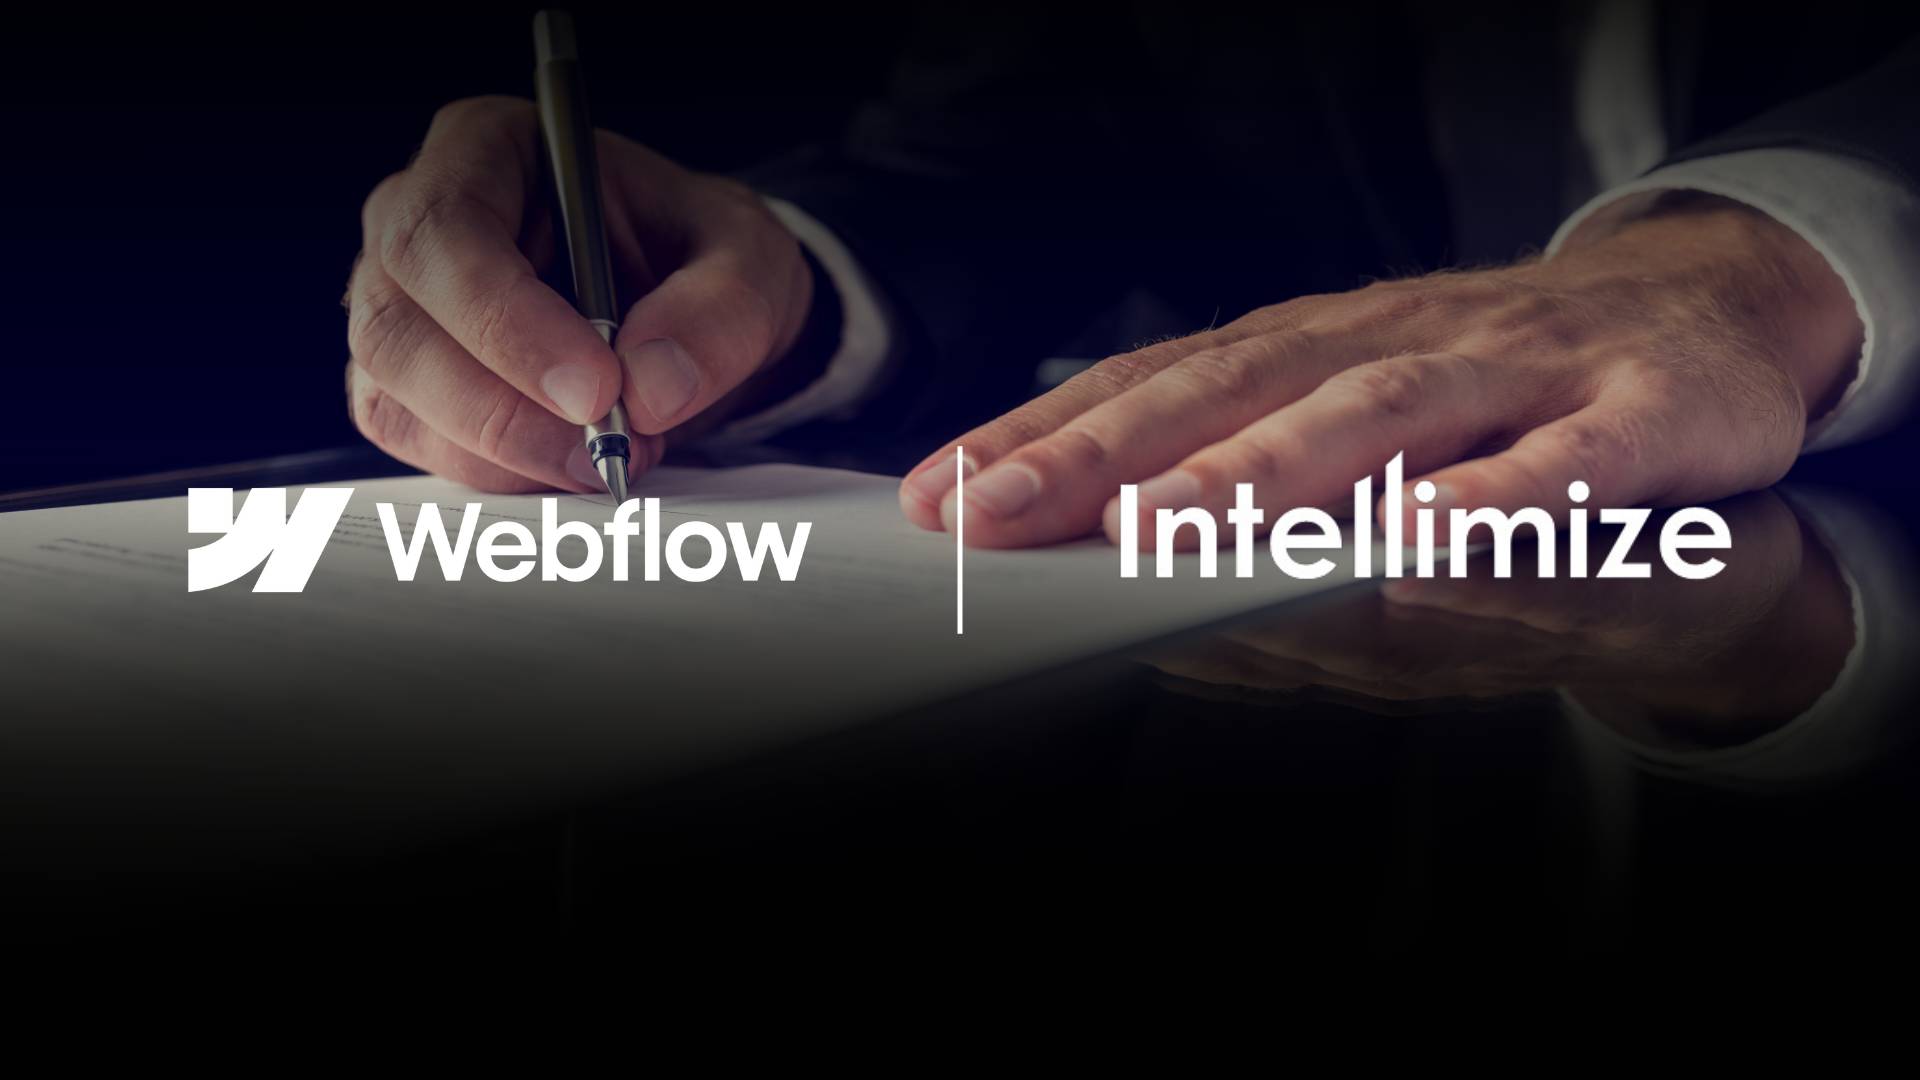 Webflow Acquires Intellimize to Enhance Website Personalization Capabilities